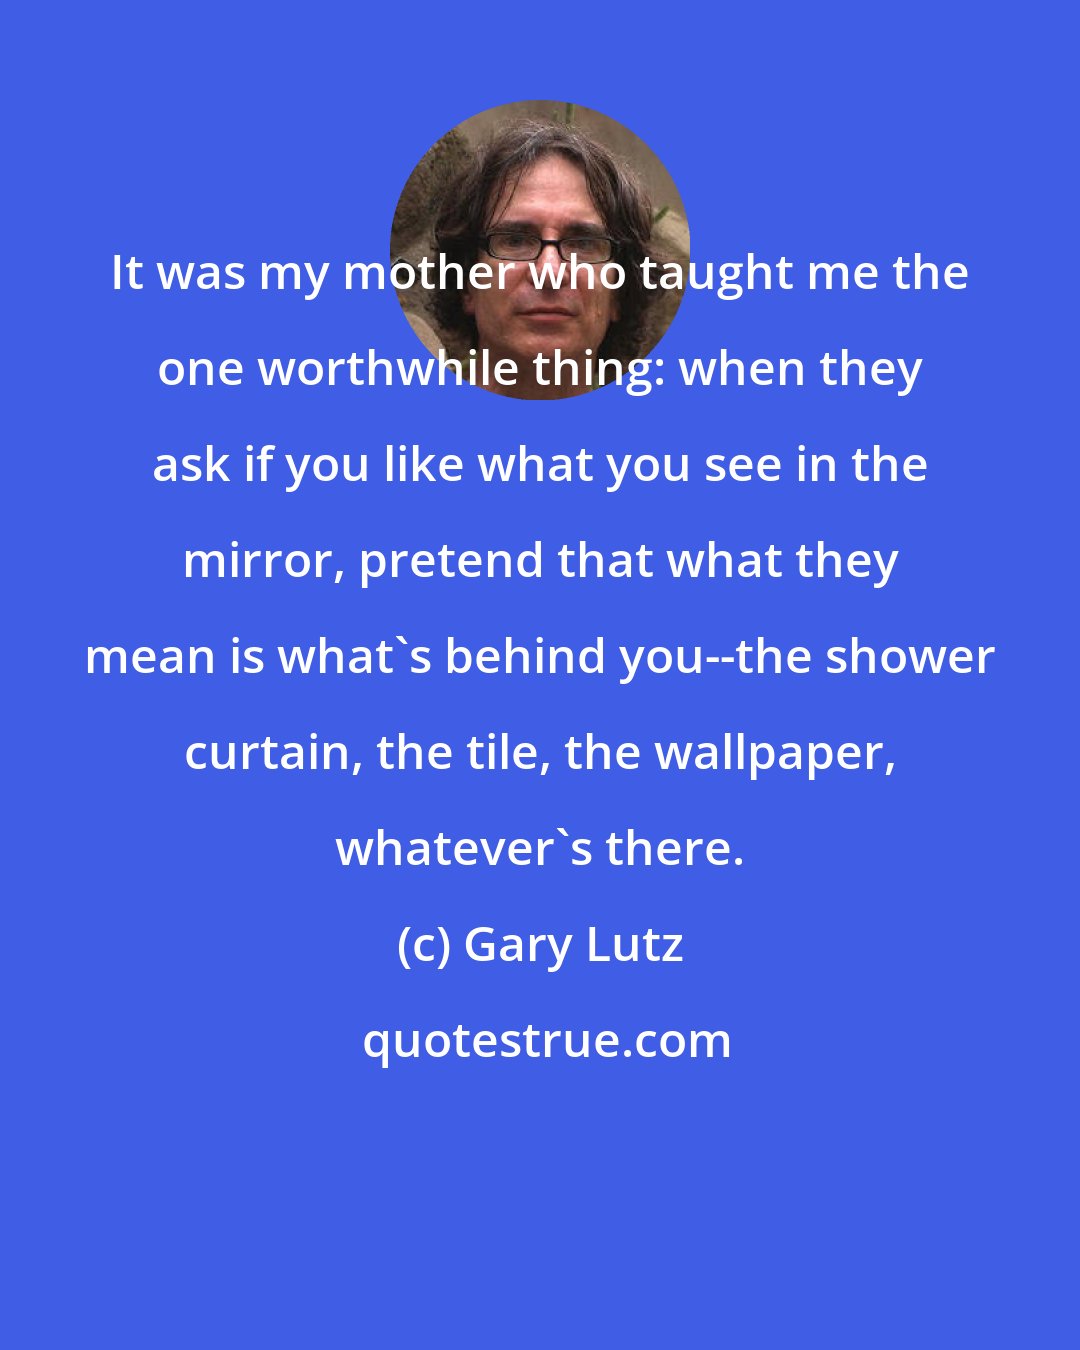 Gary Lutz: It was my mother who taught me the one worthwhile thing: when they ask if you like what you see in the mirror, pretend that what they mean is what's behind you--the shower curtain, the tile, the wallpaper, whatever's there.